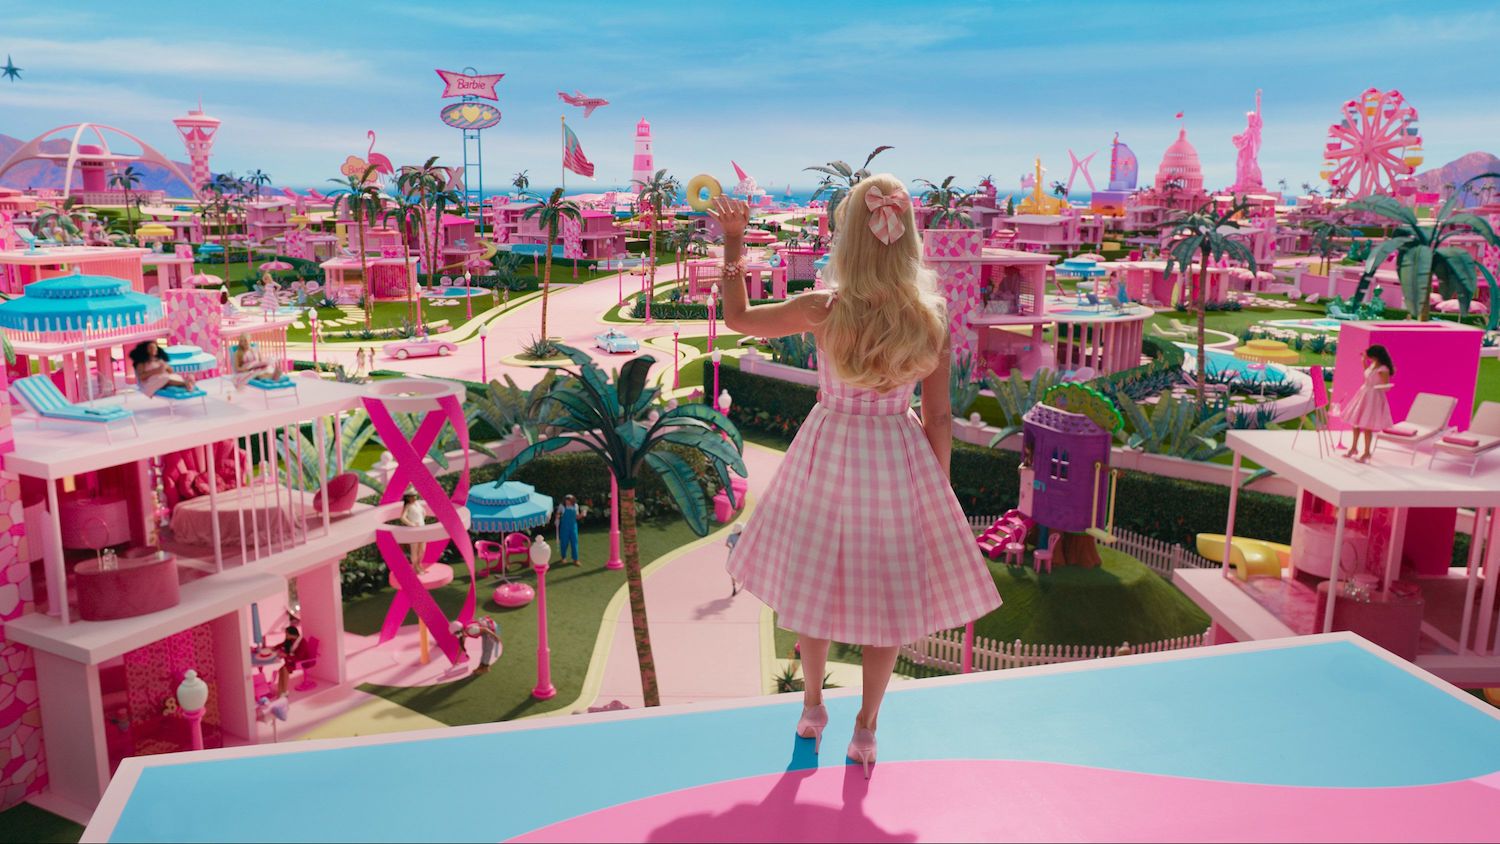 Neil deGrasse Tyson used science to locate Barbie Land in the real world 